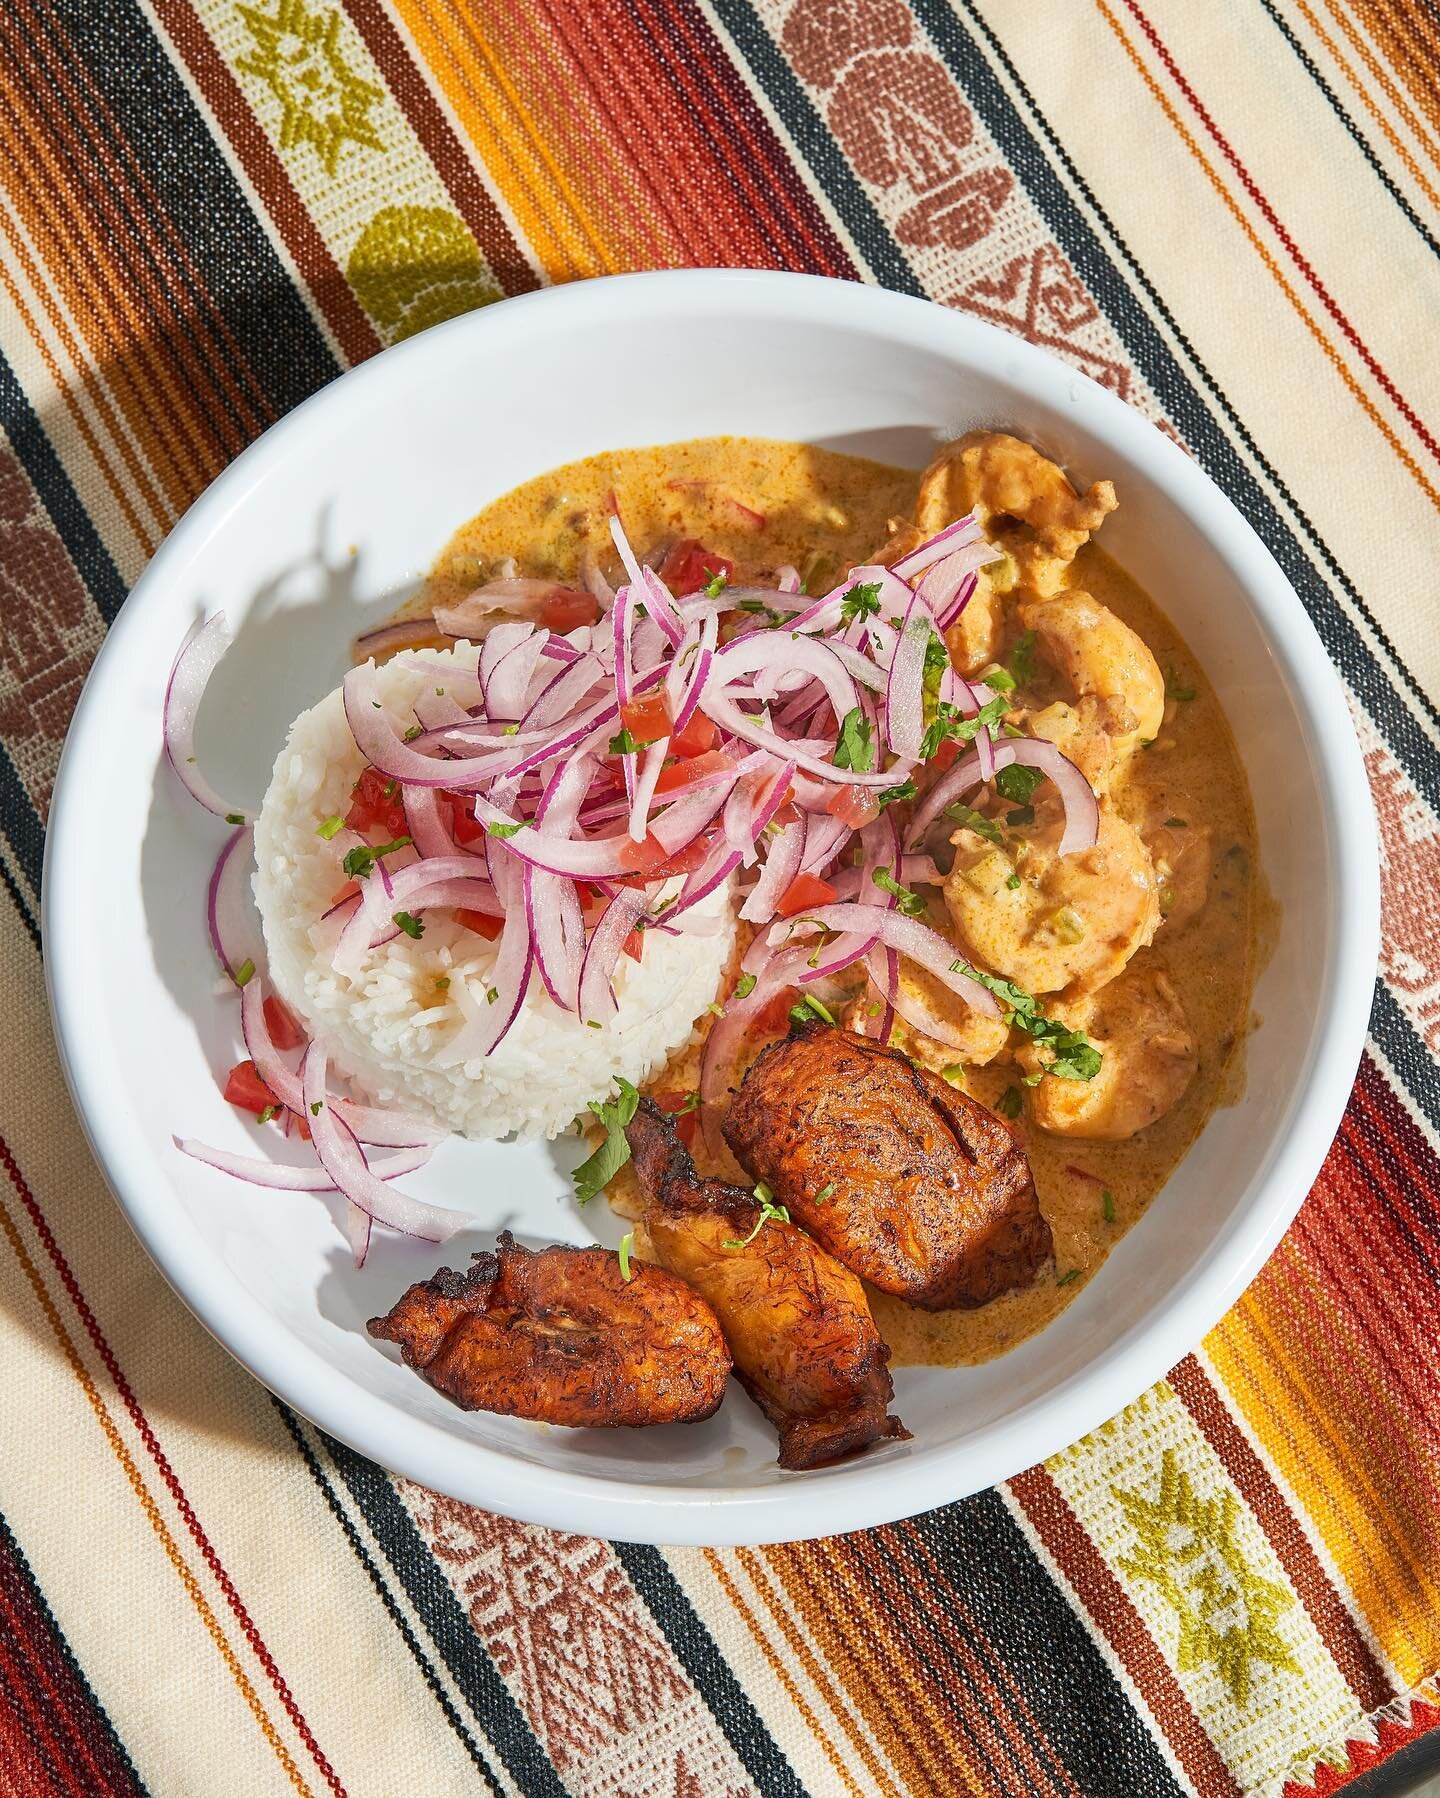 Attention! Lunch is around the corner! 🍽️
We have this magnificent Coconut Shrimp 🍤Curry 🙌🏻 it&rsquo;s a must for lunch! 
We highlight and celebrate the impeccable cuisine of South America 🇪🇨🇵🇪🇦🇷🇨🇴🇻🇪🇧🇴🇨🇱